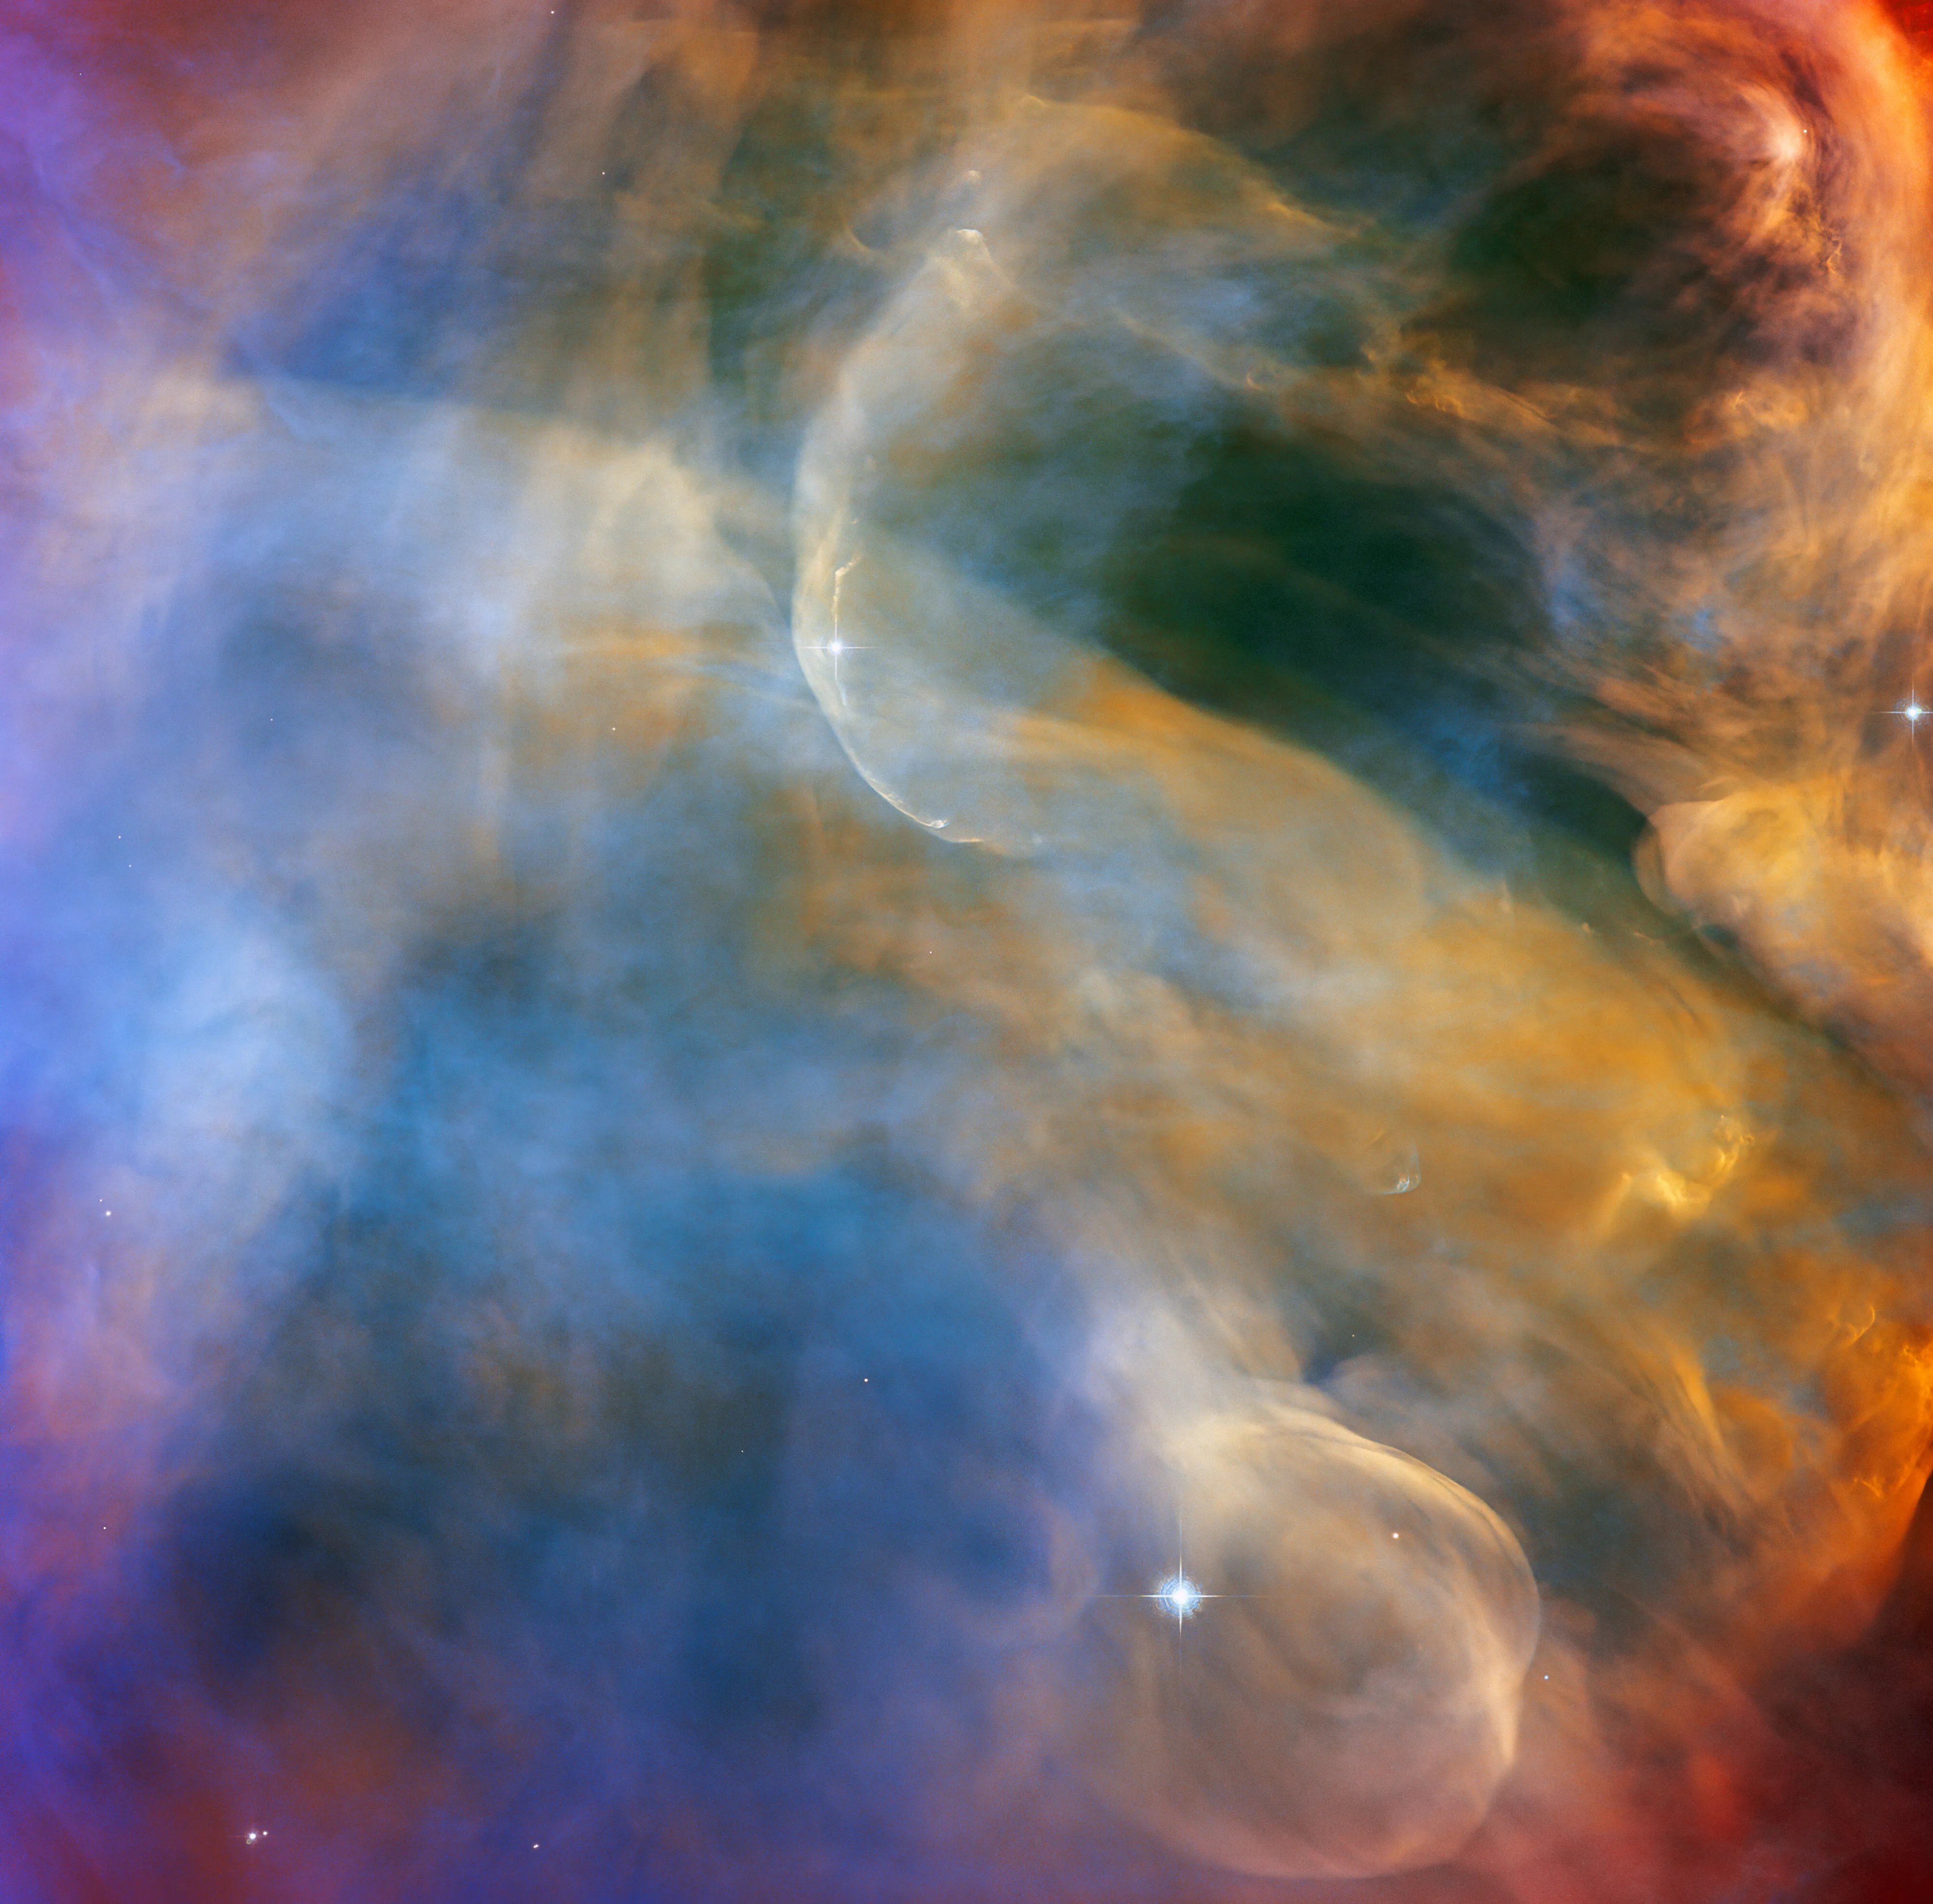 Clouds of blue, orange, yellow, and red fill the scene. wispy-white shockwave arcs stream across the colorful background